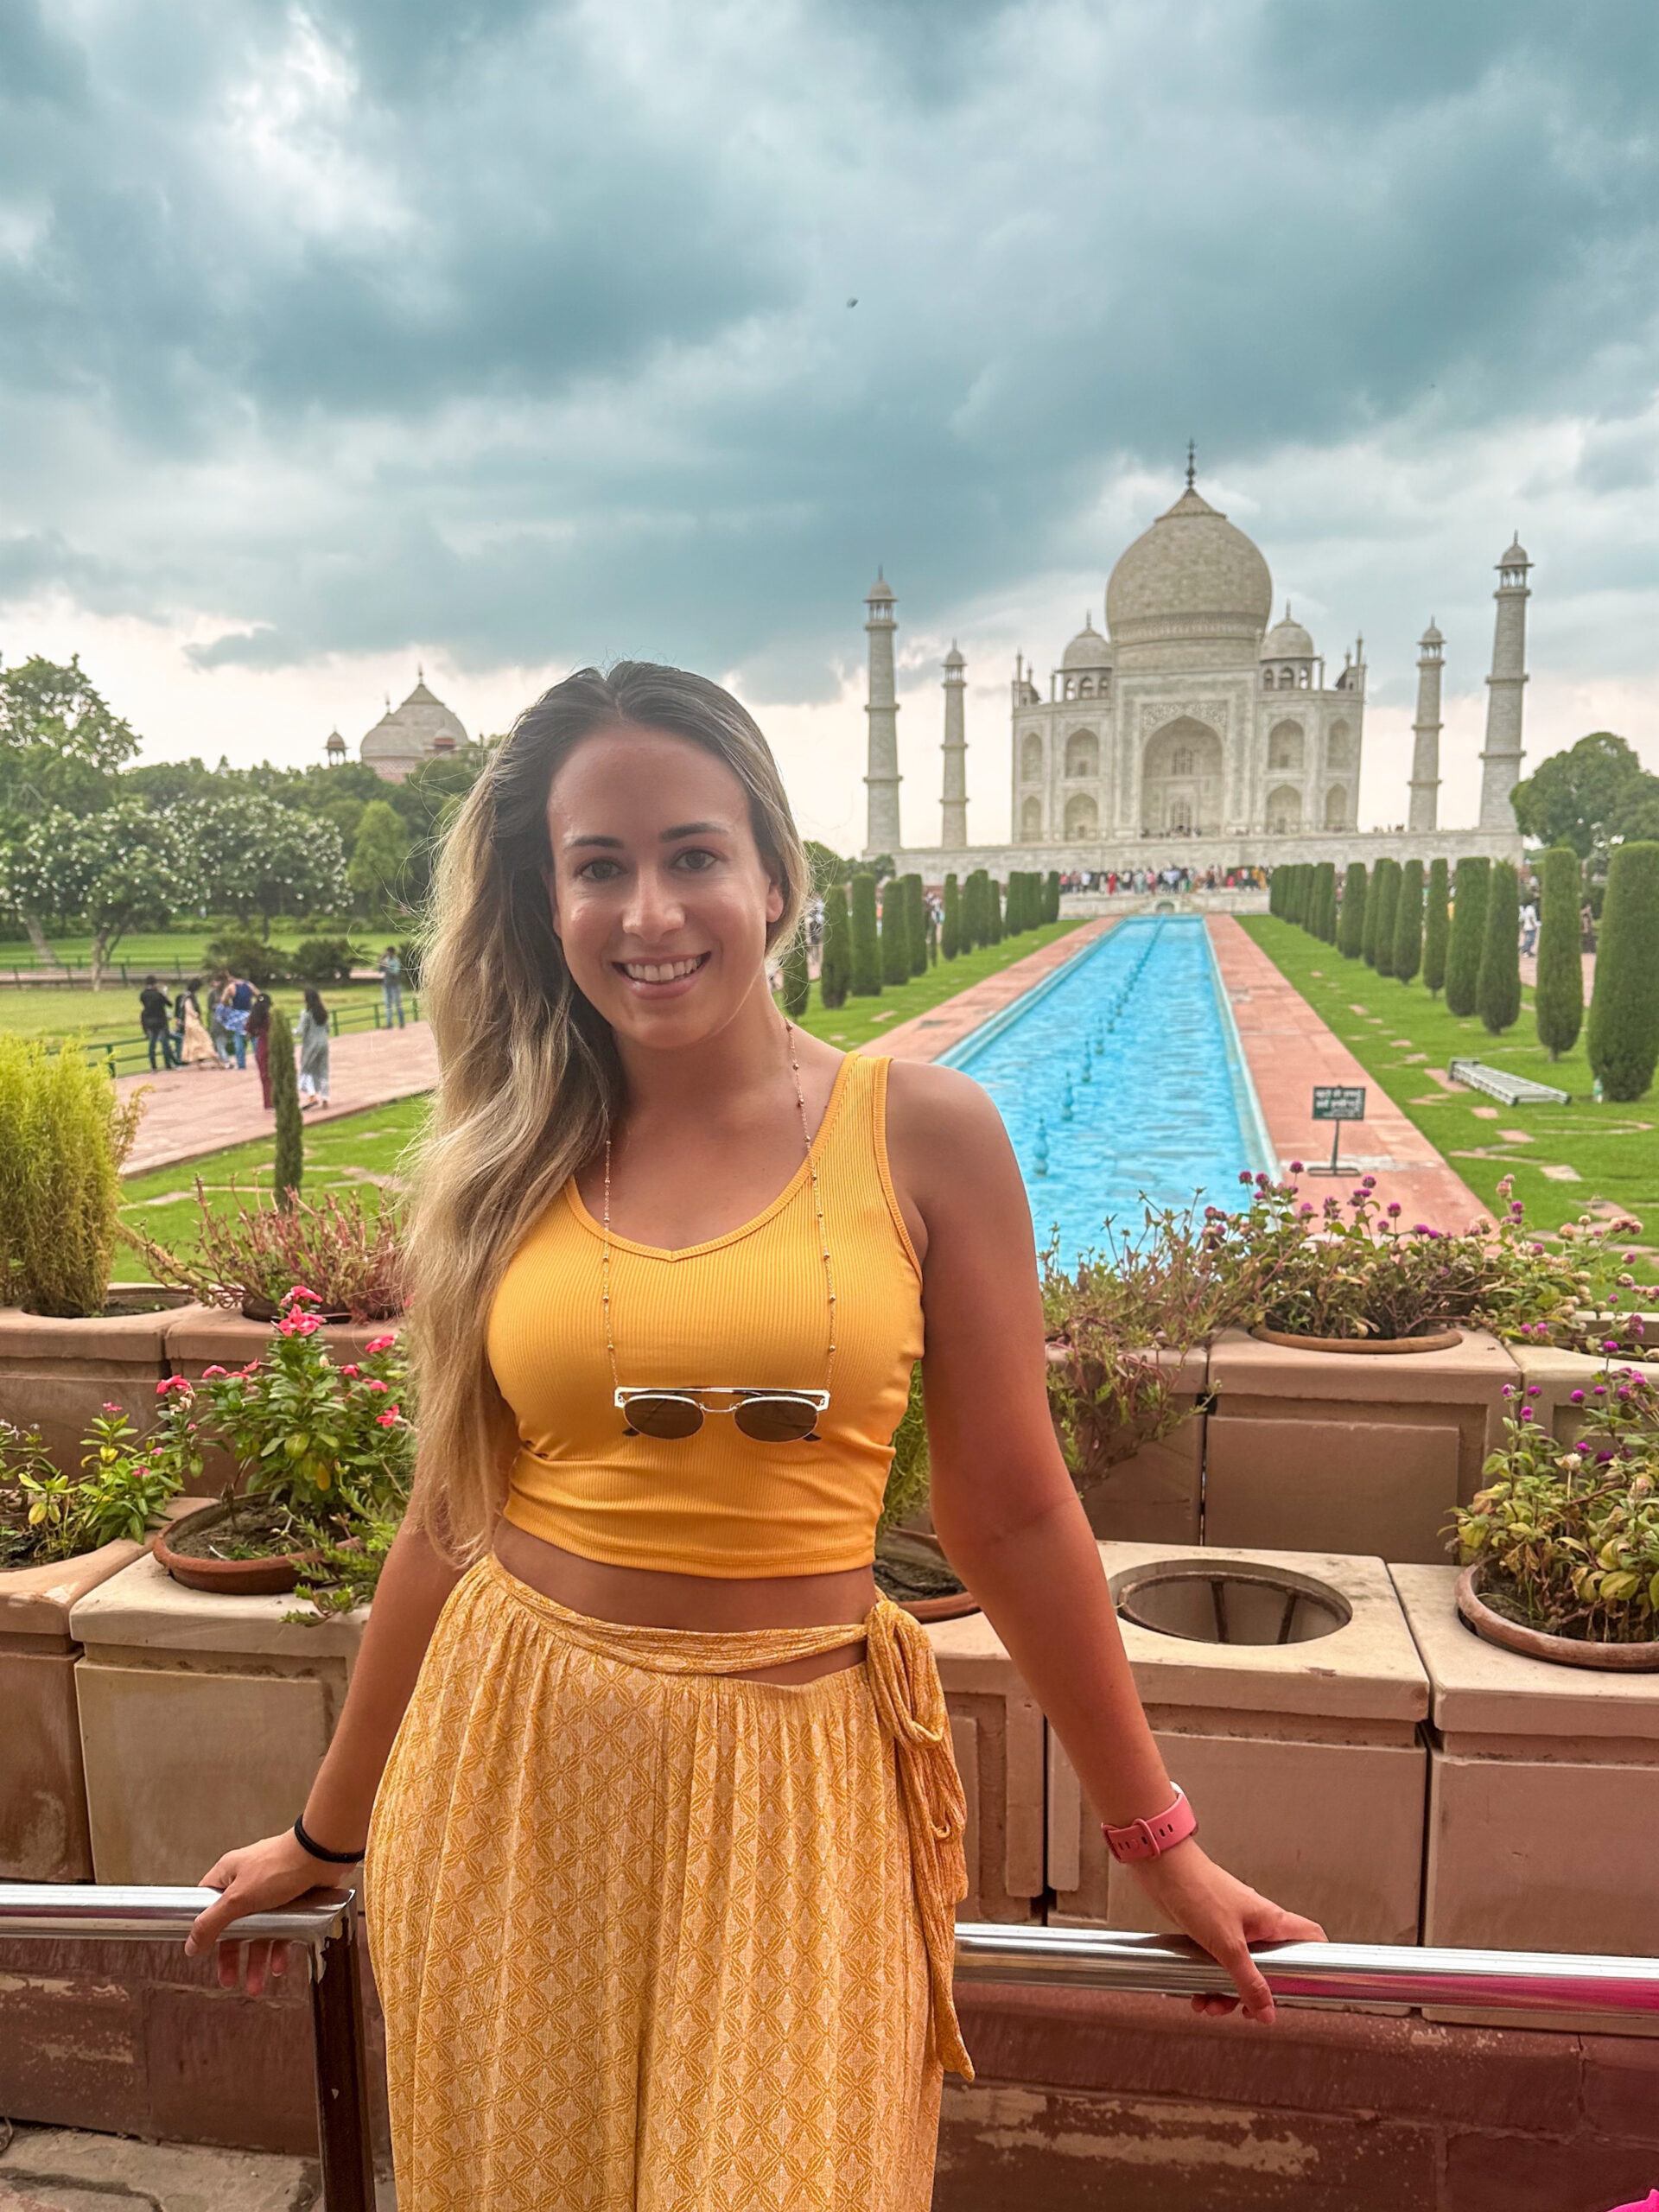 Ultimate India Travel Guide: Everything You Need to Know Before Visiting India